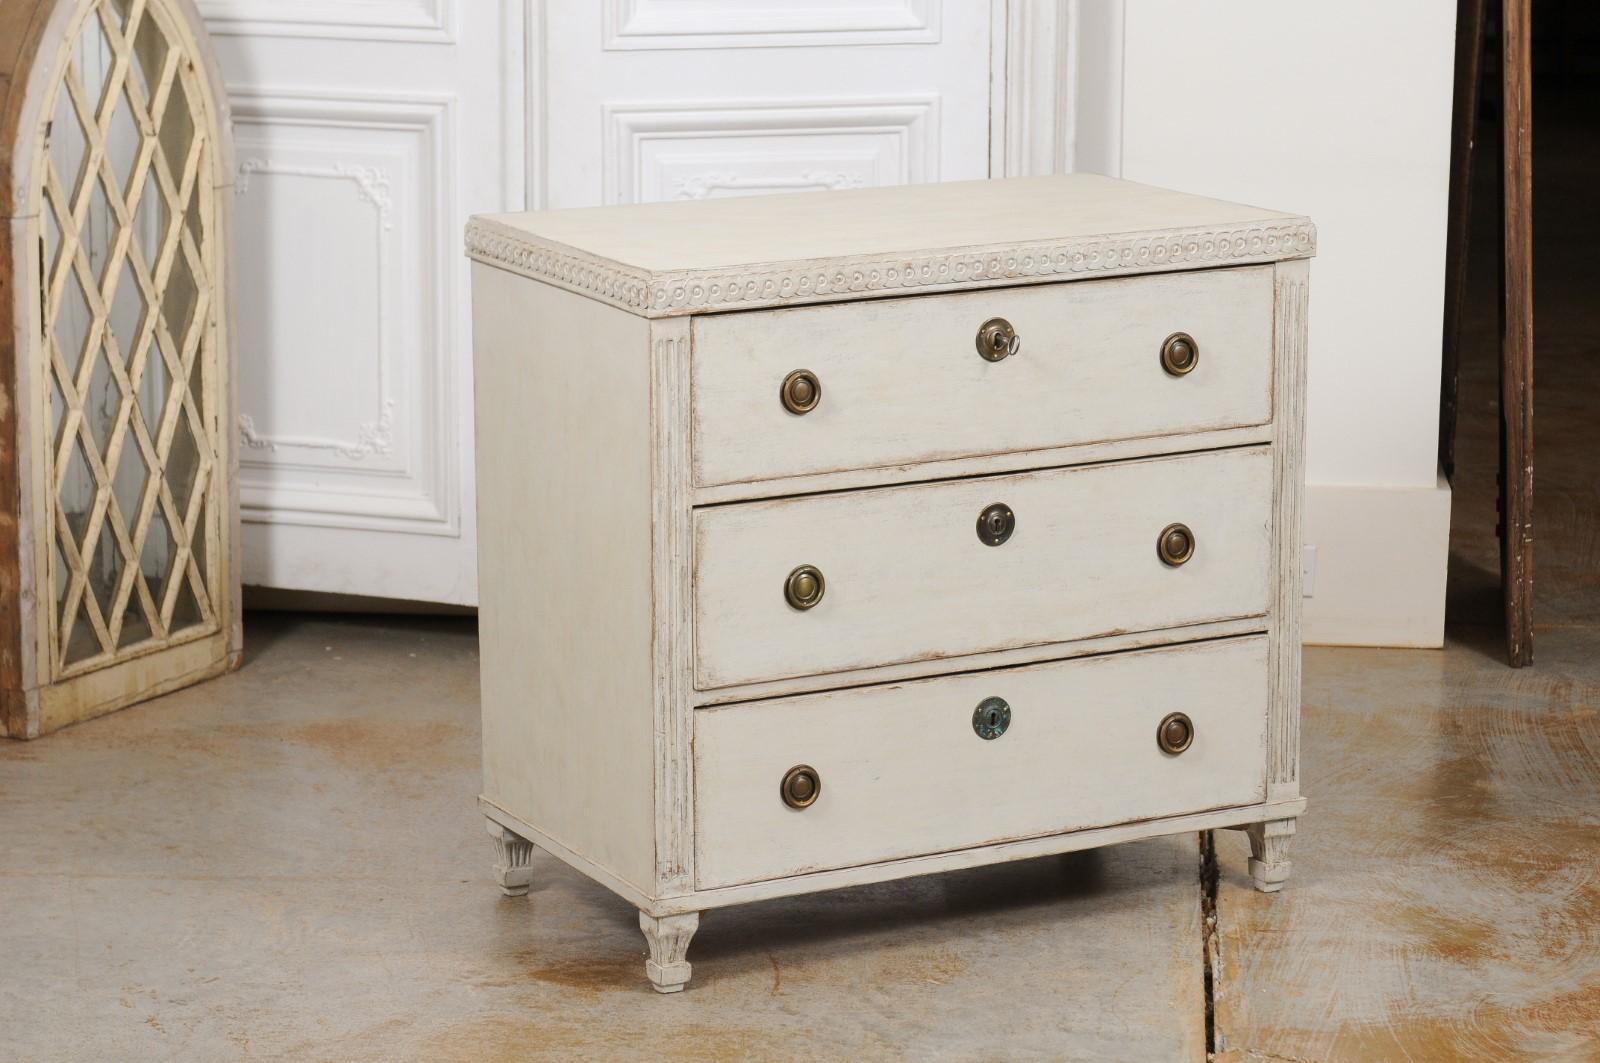 A Swedish neoclassical style painted wood chest of drawers from the mid-19th century, with guilloche motifs and fluted side posts. Created in Sweden during the third quarter of the 19th century, this painted chest features a rectangular top sitting